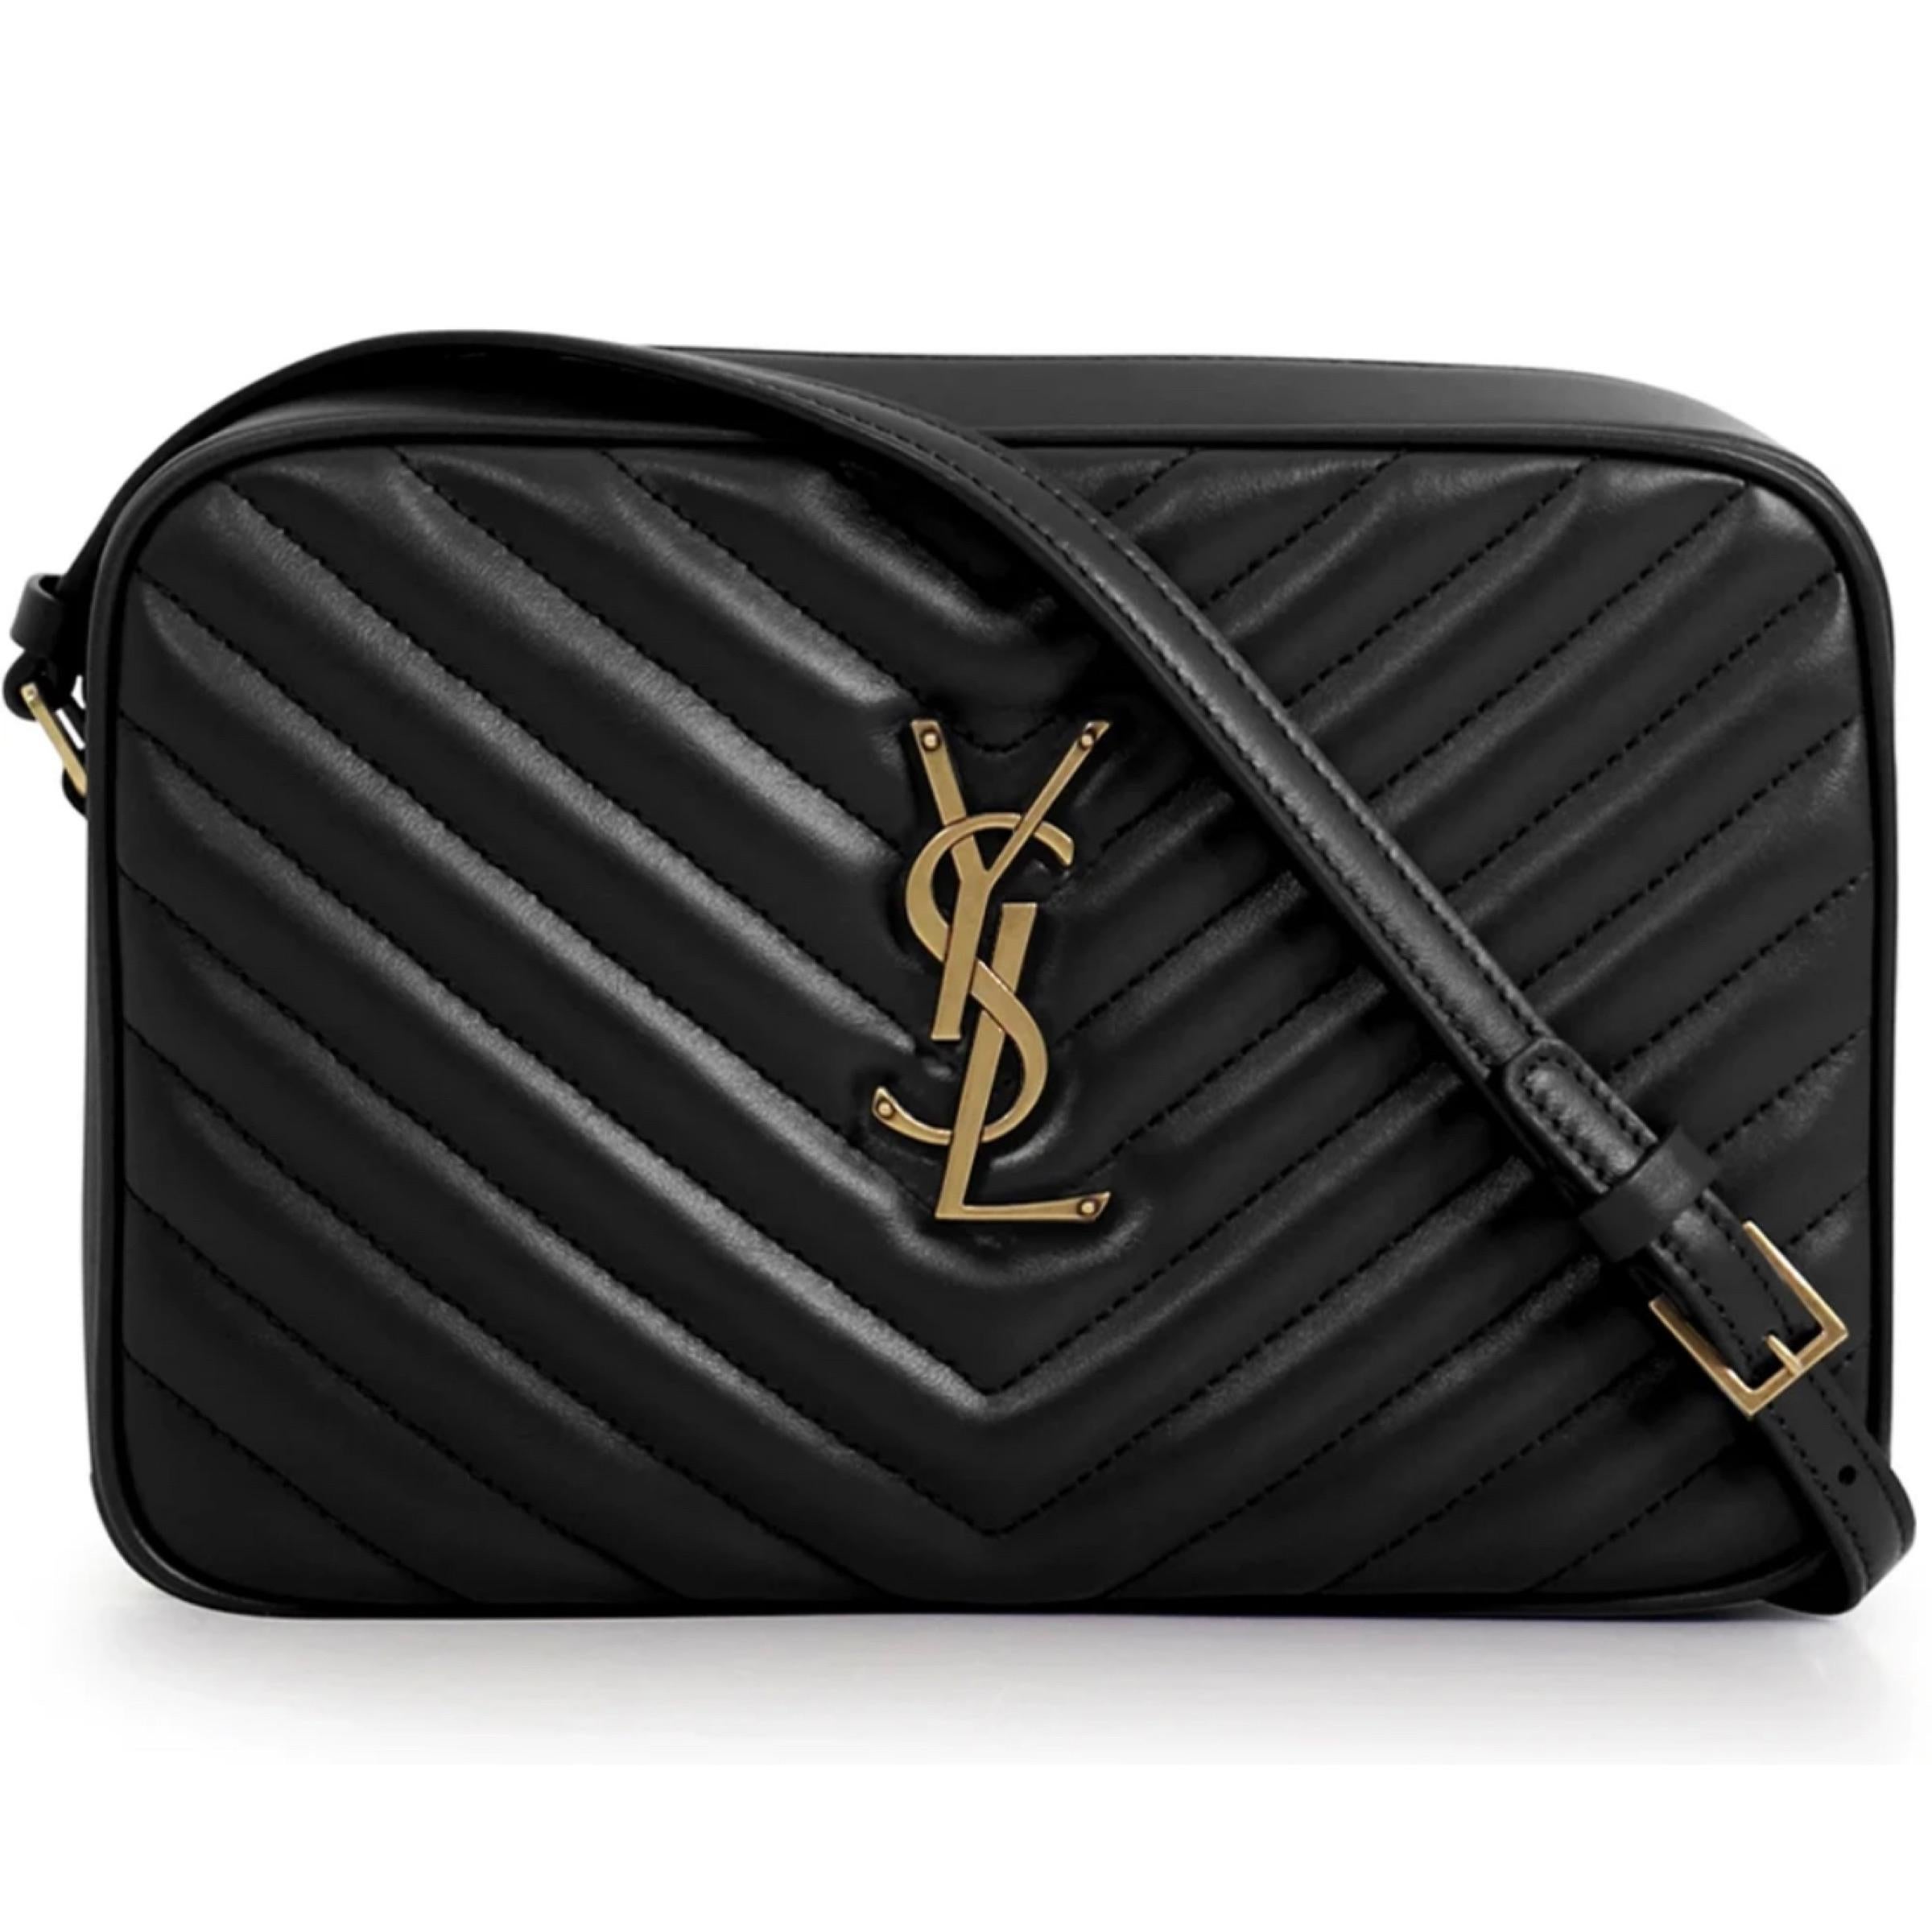 New Saint Laurent Black Quilted Leather Lou Crossbody Camera Shoulder Bag

Authenticity Guaranteed

DETAILS
Brand: Saint Laurent
Condition: brand new
Color: Black
Material: Leather
Bronze-tone hardware
Grosgrain Lining
Zip closure
Interior: one main